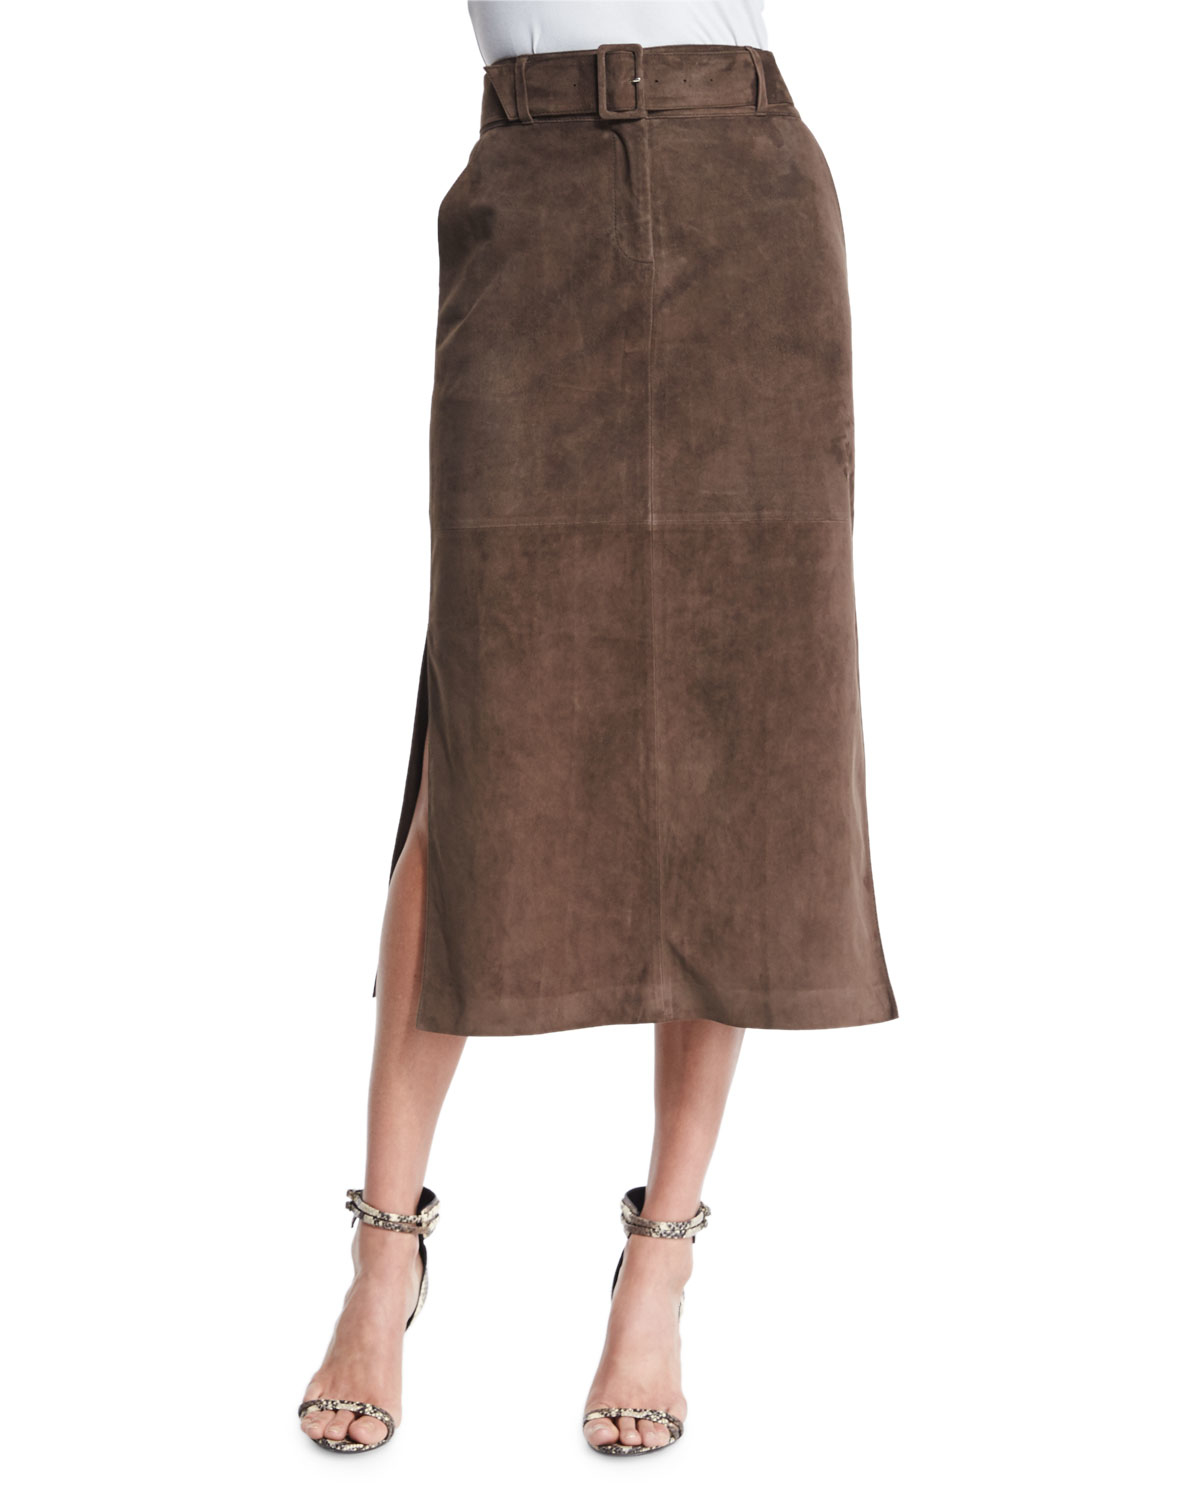 Lyst - Lafayette 148 New York Ramona Belted Suede Skirt in Brown